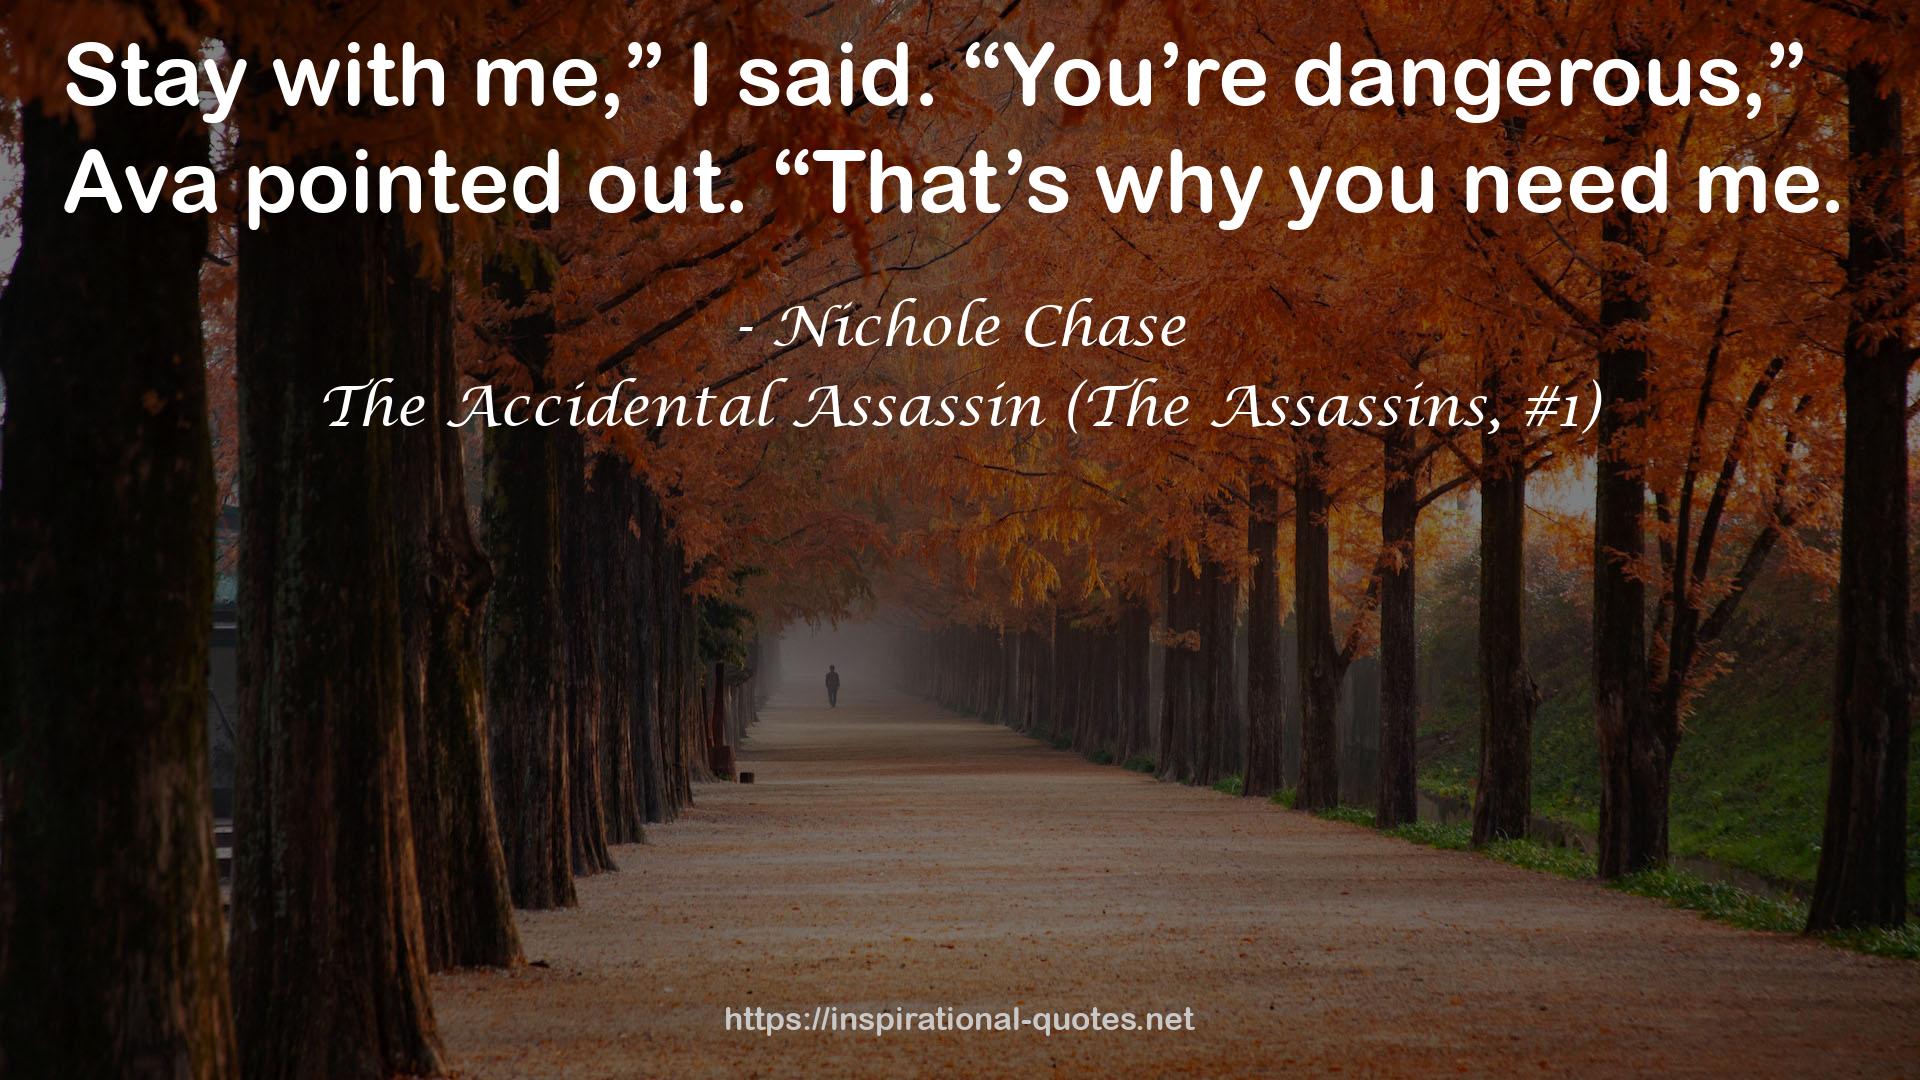 The Accidental Assassin (The Assassins, #1) QUOTES